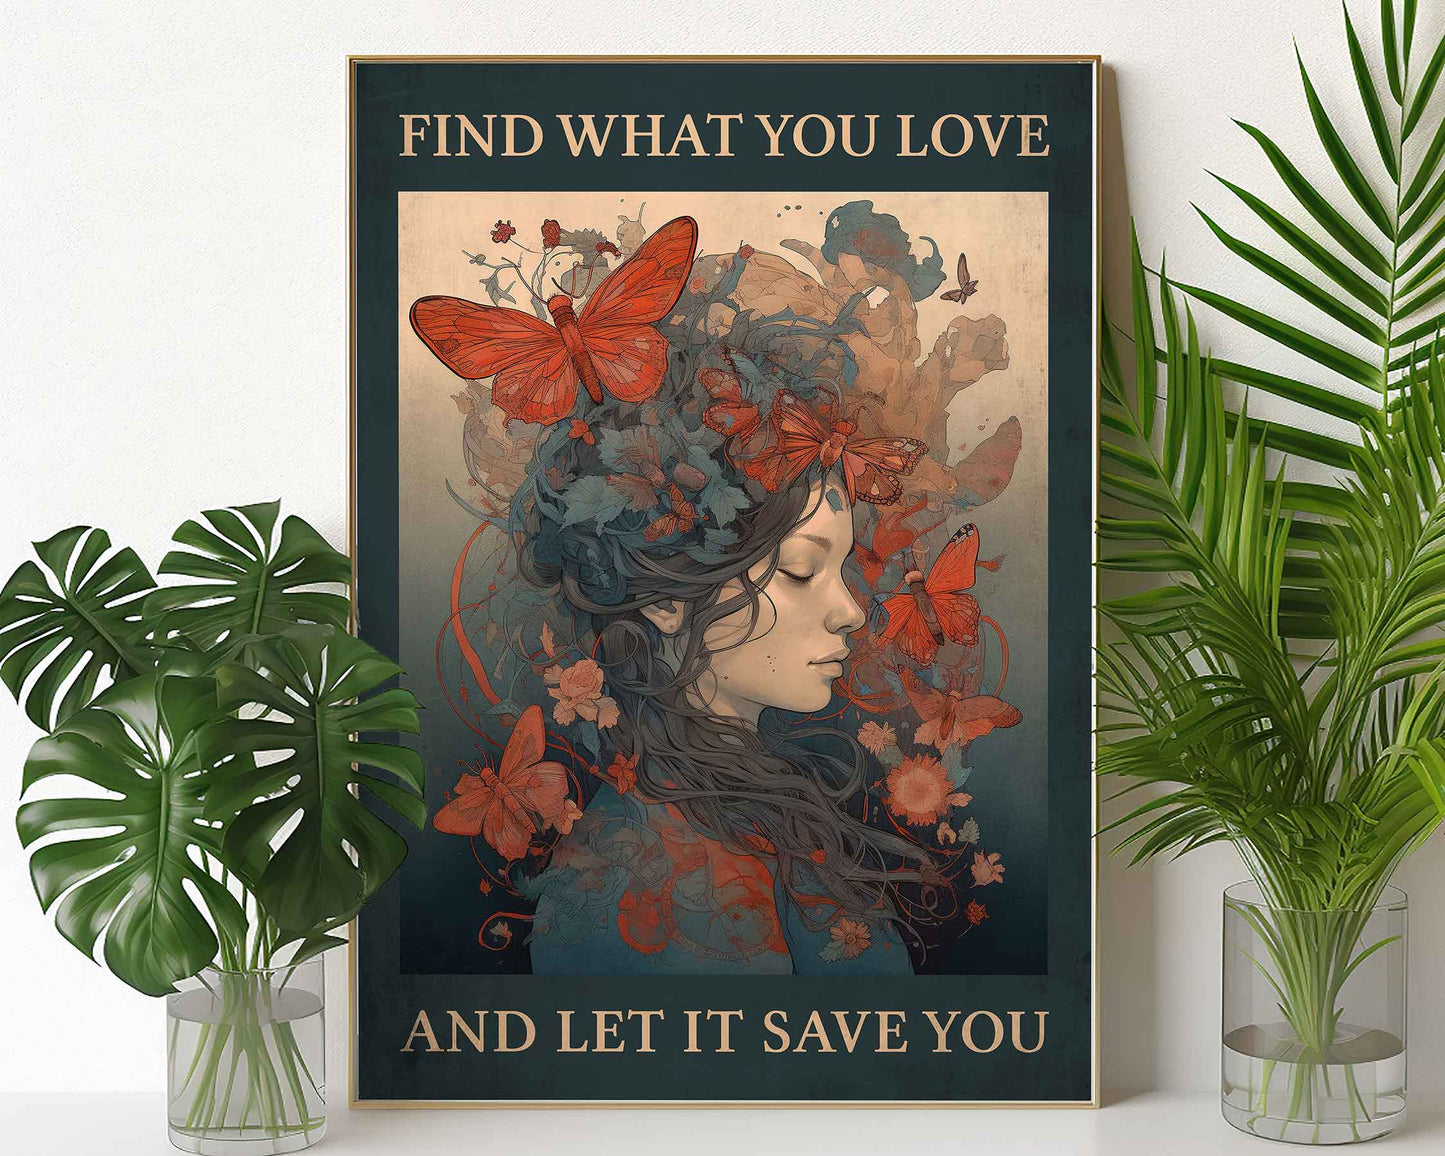 Framed Image of Find What You Love And Let It Save You Vintage Art Print Famous Quote